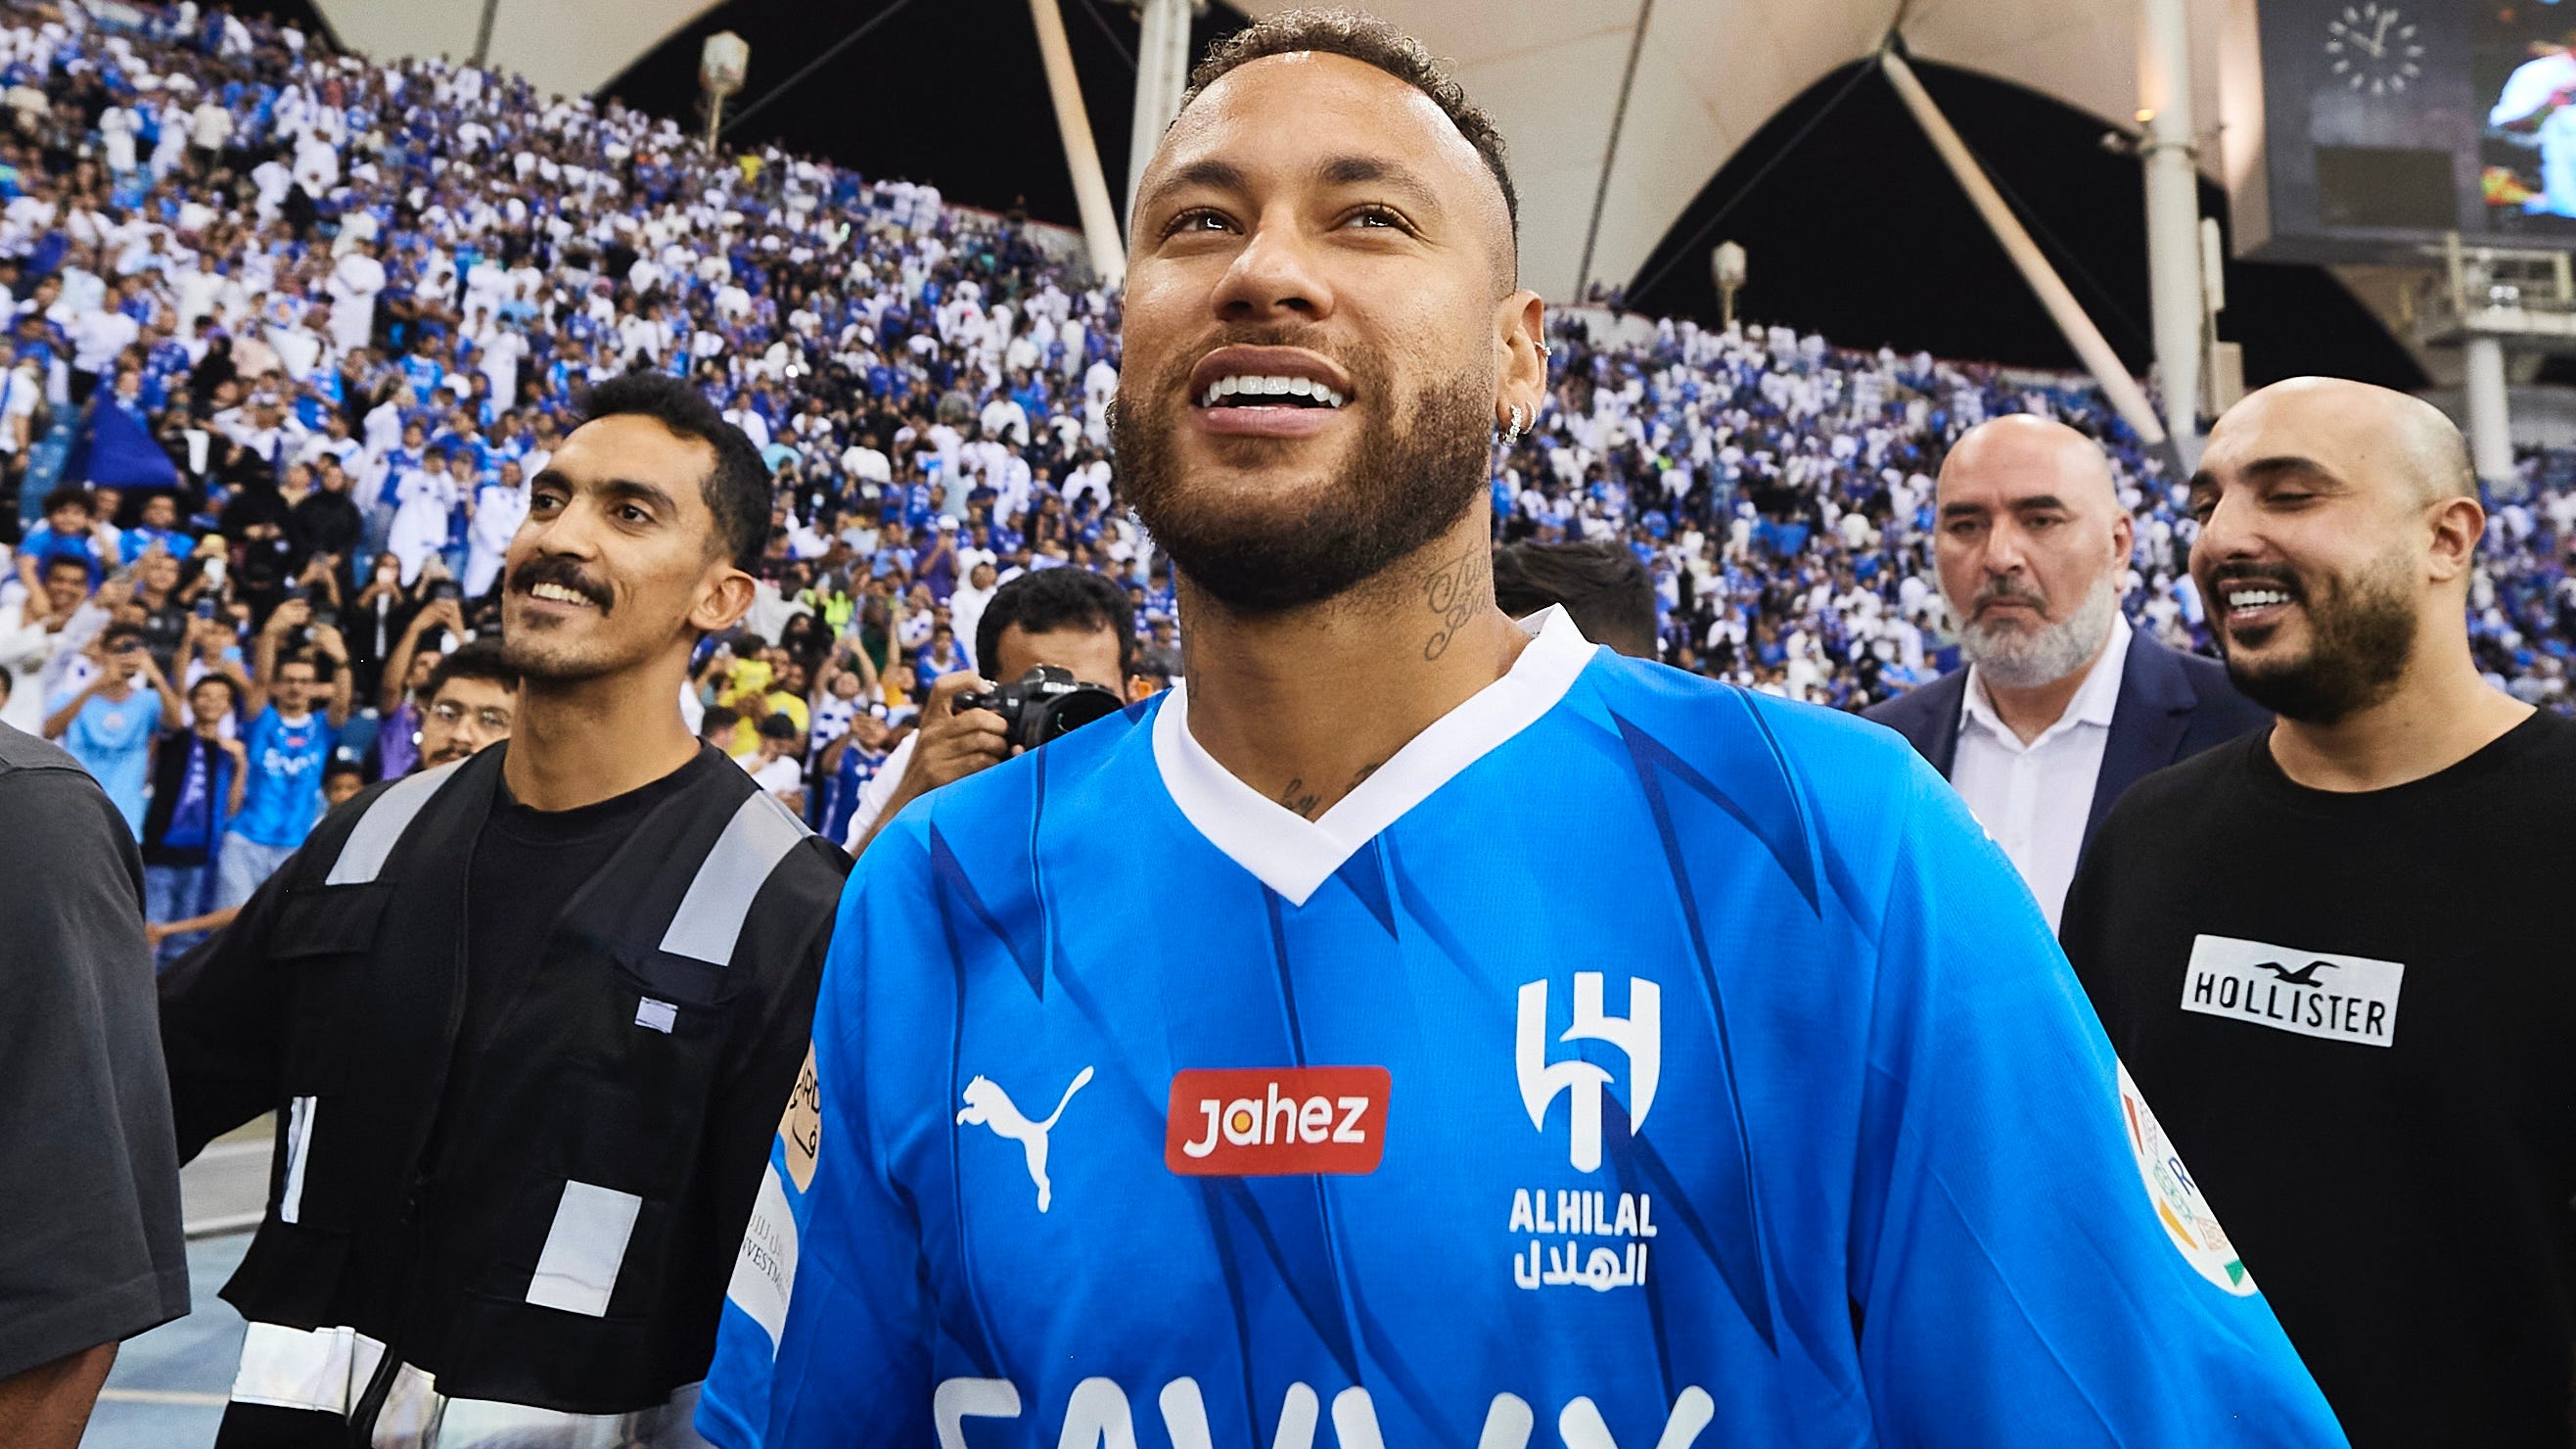 ‘The ball is round, there’s a goal!’ – Brazil & Al-Hilal superstar Neymar delivers sarcastic response to questions of Saudi league standards | Goal.com UK